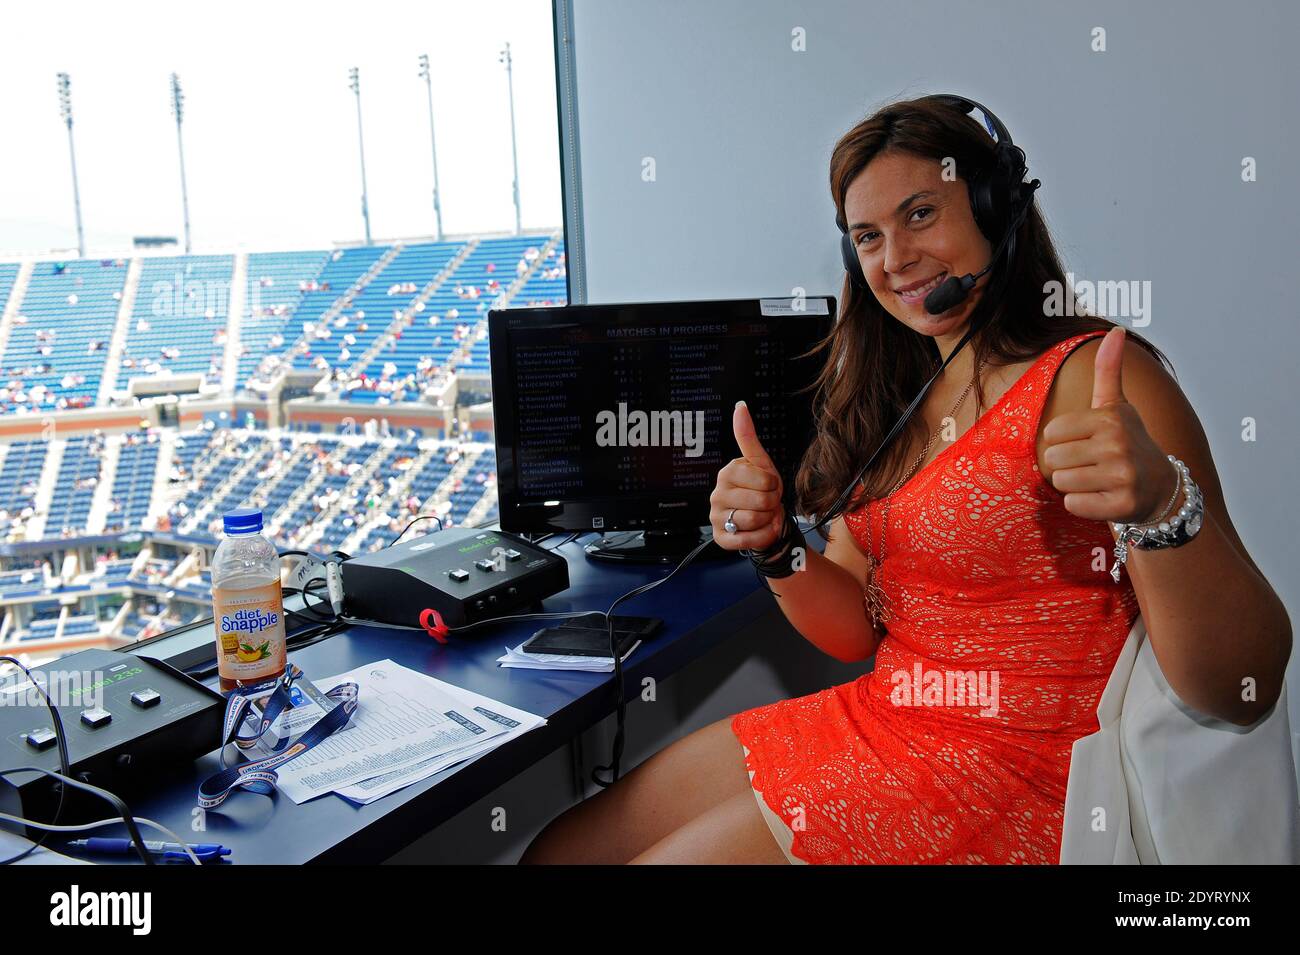 Former tennis player Marion Bartoli makes her debut as a sports commentator  for Eurosport France at the Tennis US Open tournament held at the Arthur  Ashe stadium in Flushing Meadows, New York